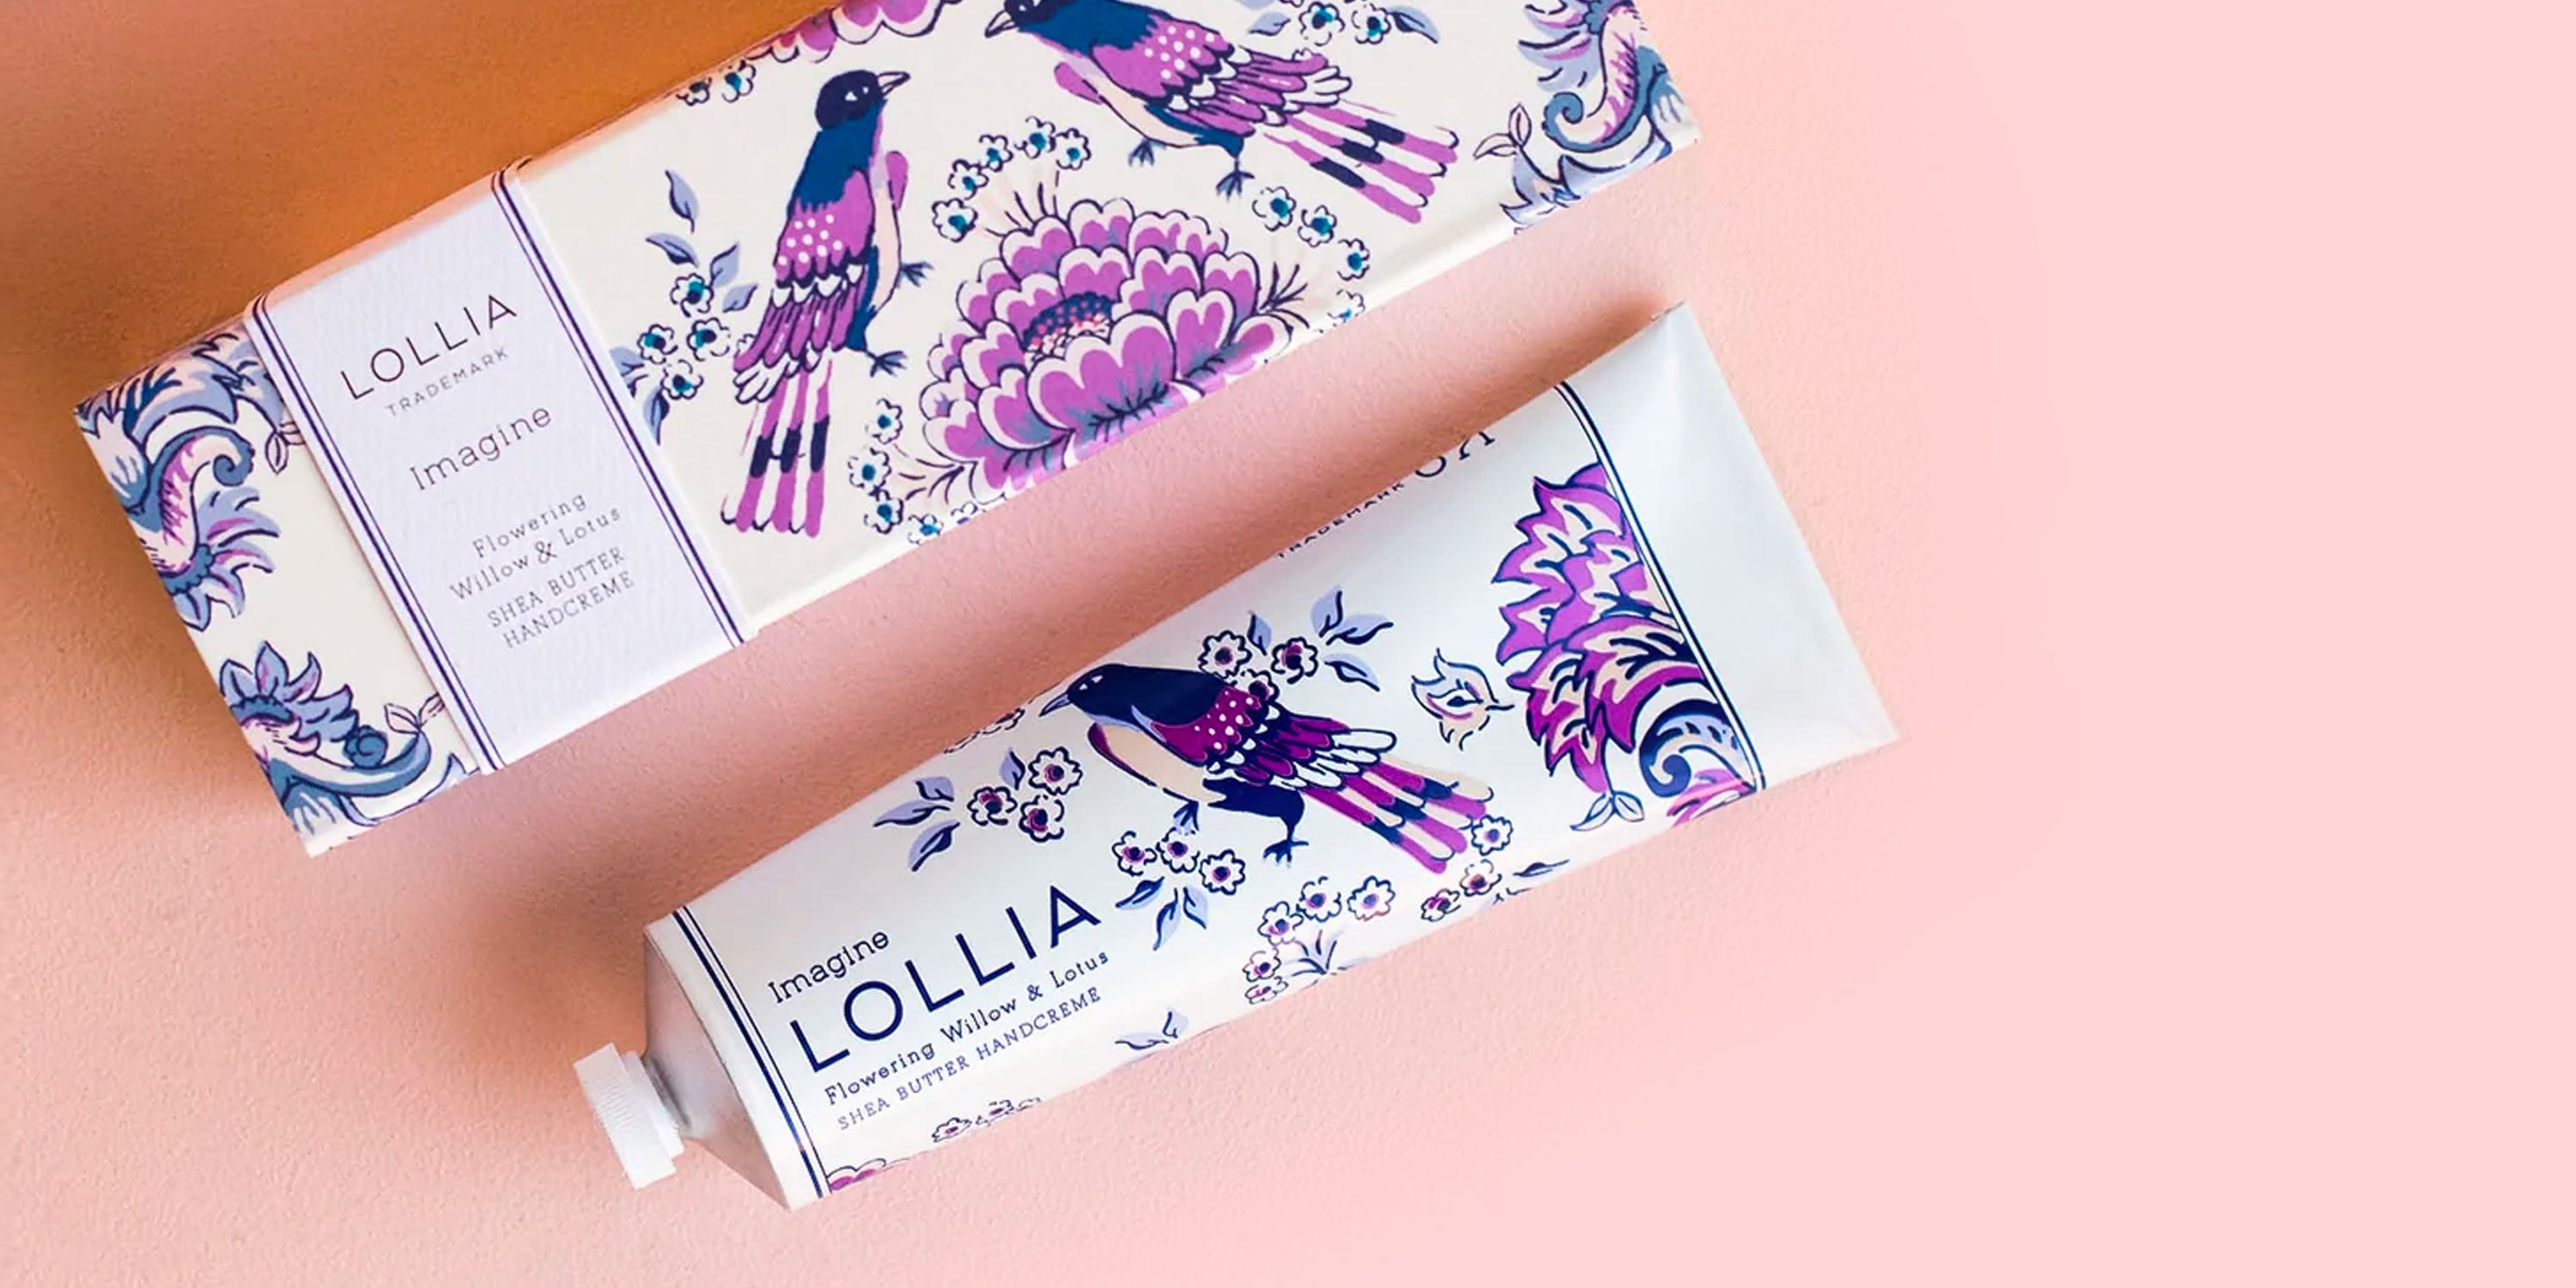 A tube and box of Lolla hand cream printed with decorative purple birds and florals rest on a pink surface